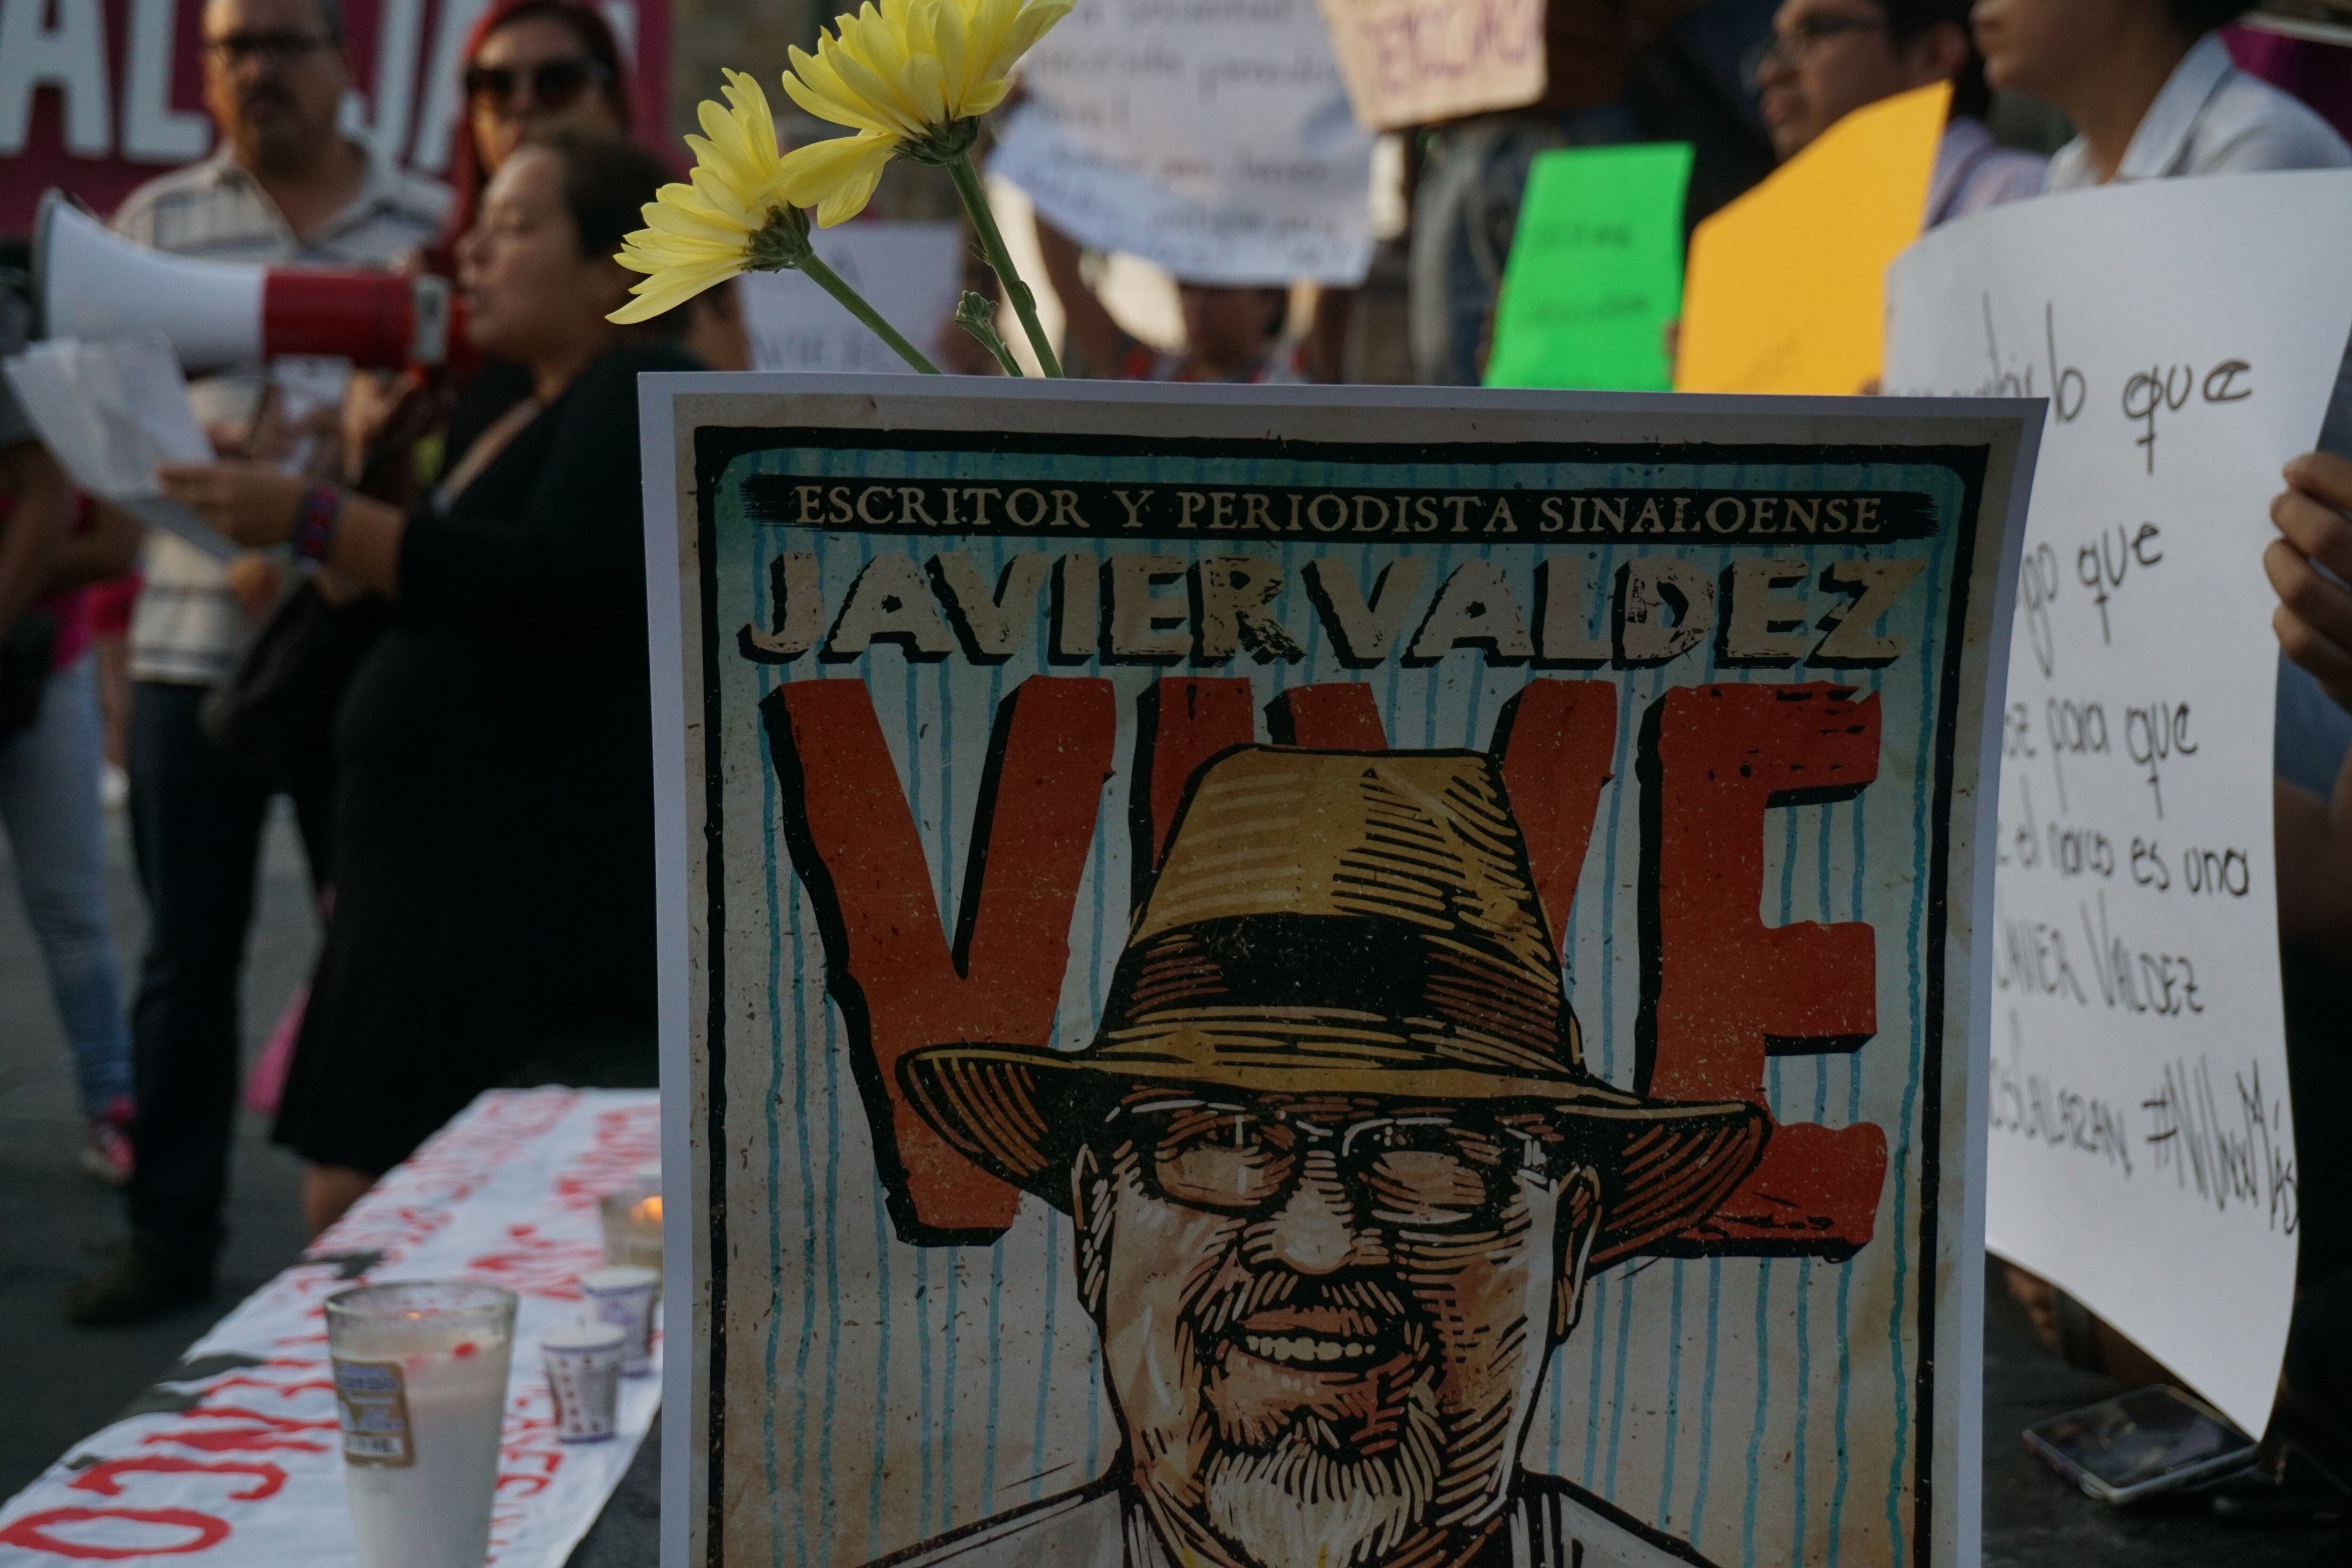 A protest in July 2017 following the murder of reporter Javier Valdez.